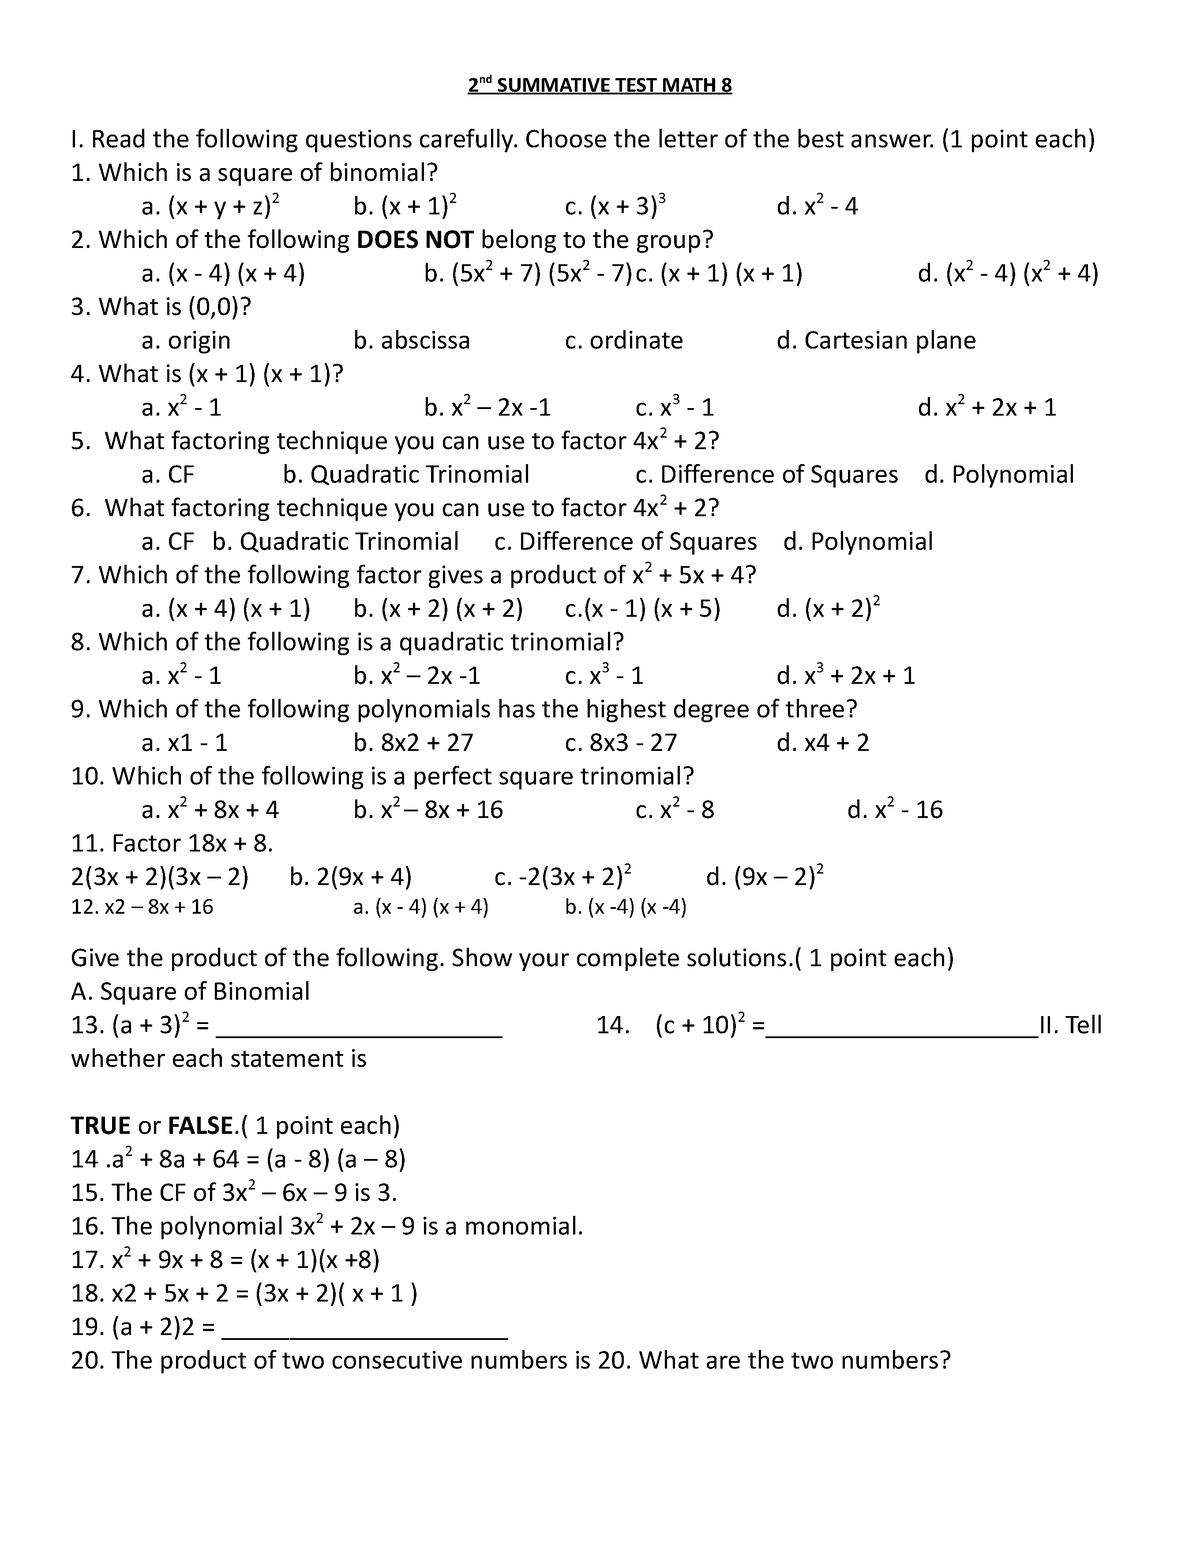 2nd Summative TEST MATH 8 - 2 nd SUMMATIVE TEST MATH 8 I. Read the ...